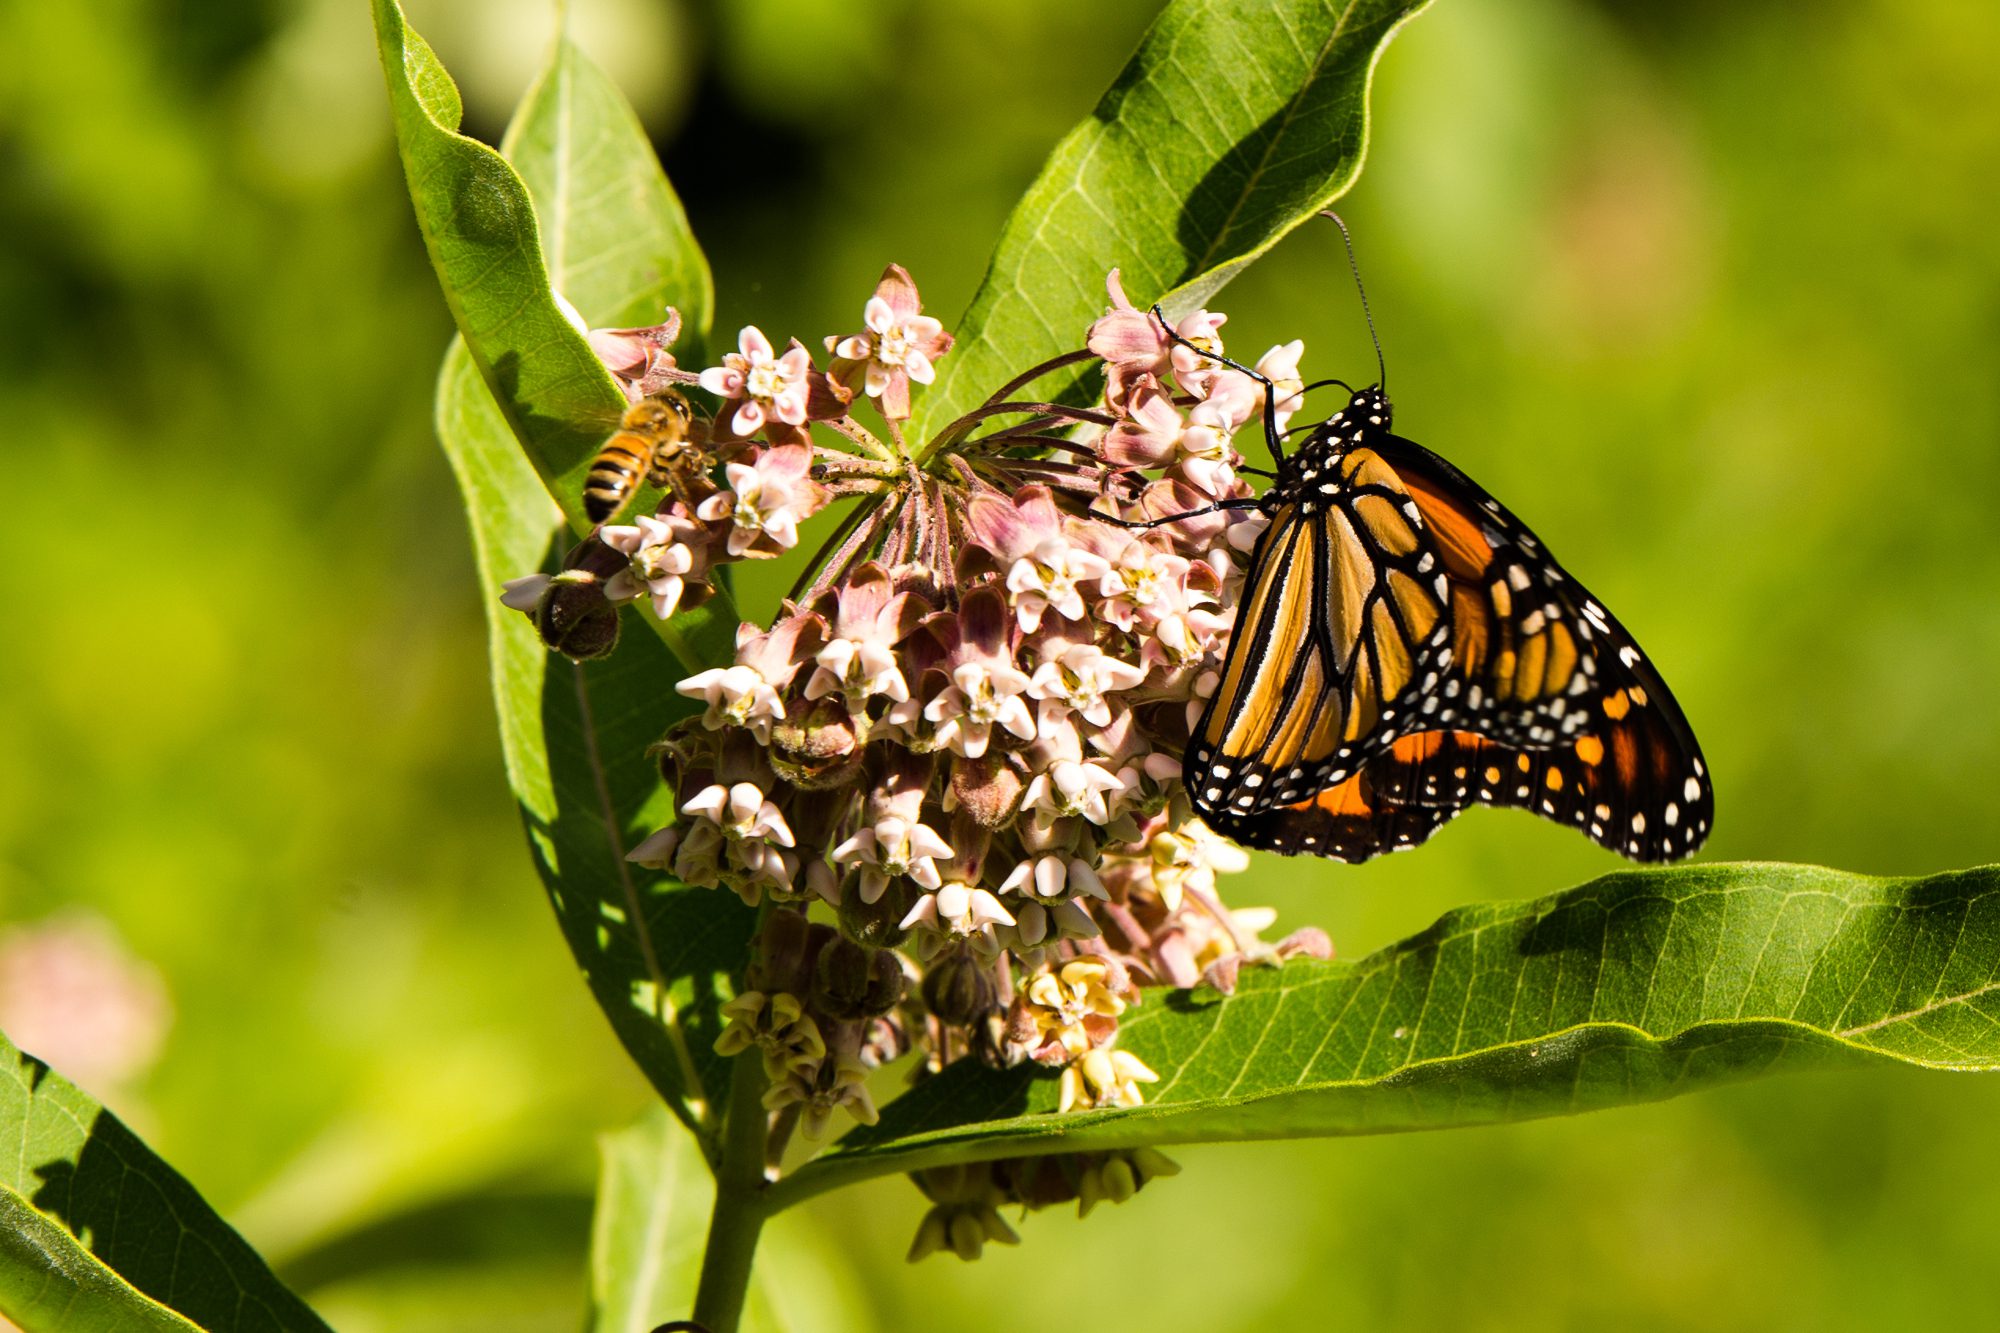 Habitats of wildlife like monarch butterflies would be destroyed.